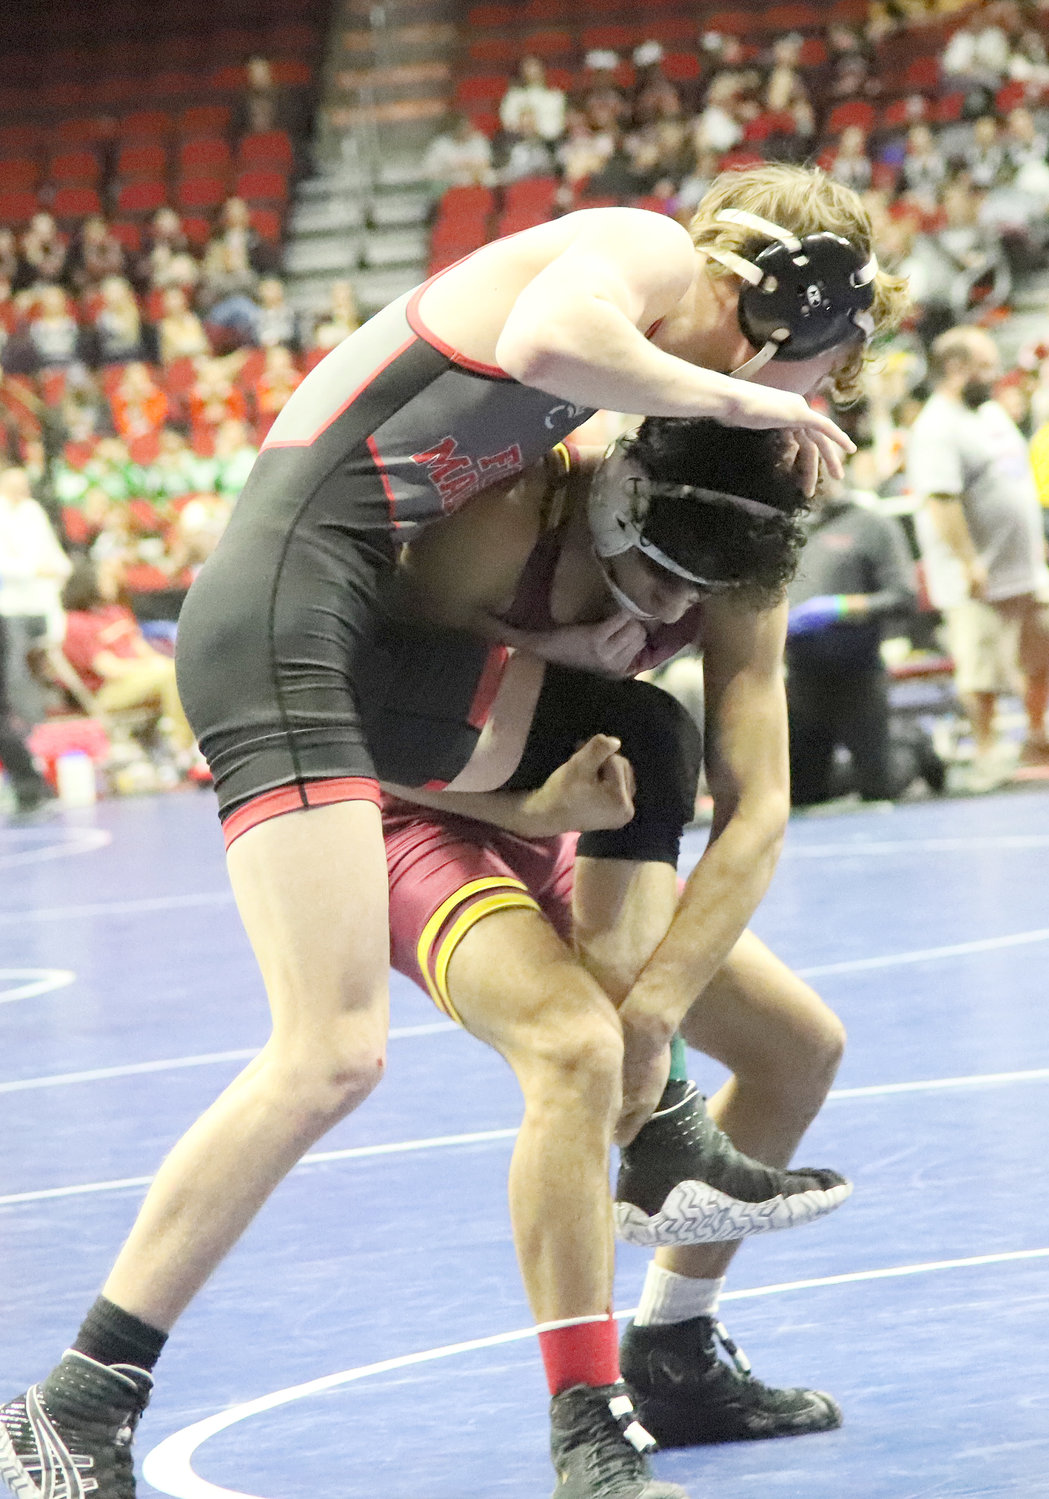 FMHS sophomore Noah Swigart tries to get out of a leg grab by Ankeny's JJ Maihan in the first period of early action Thursday night at Wells Fargo Arena in Des Moines.